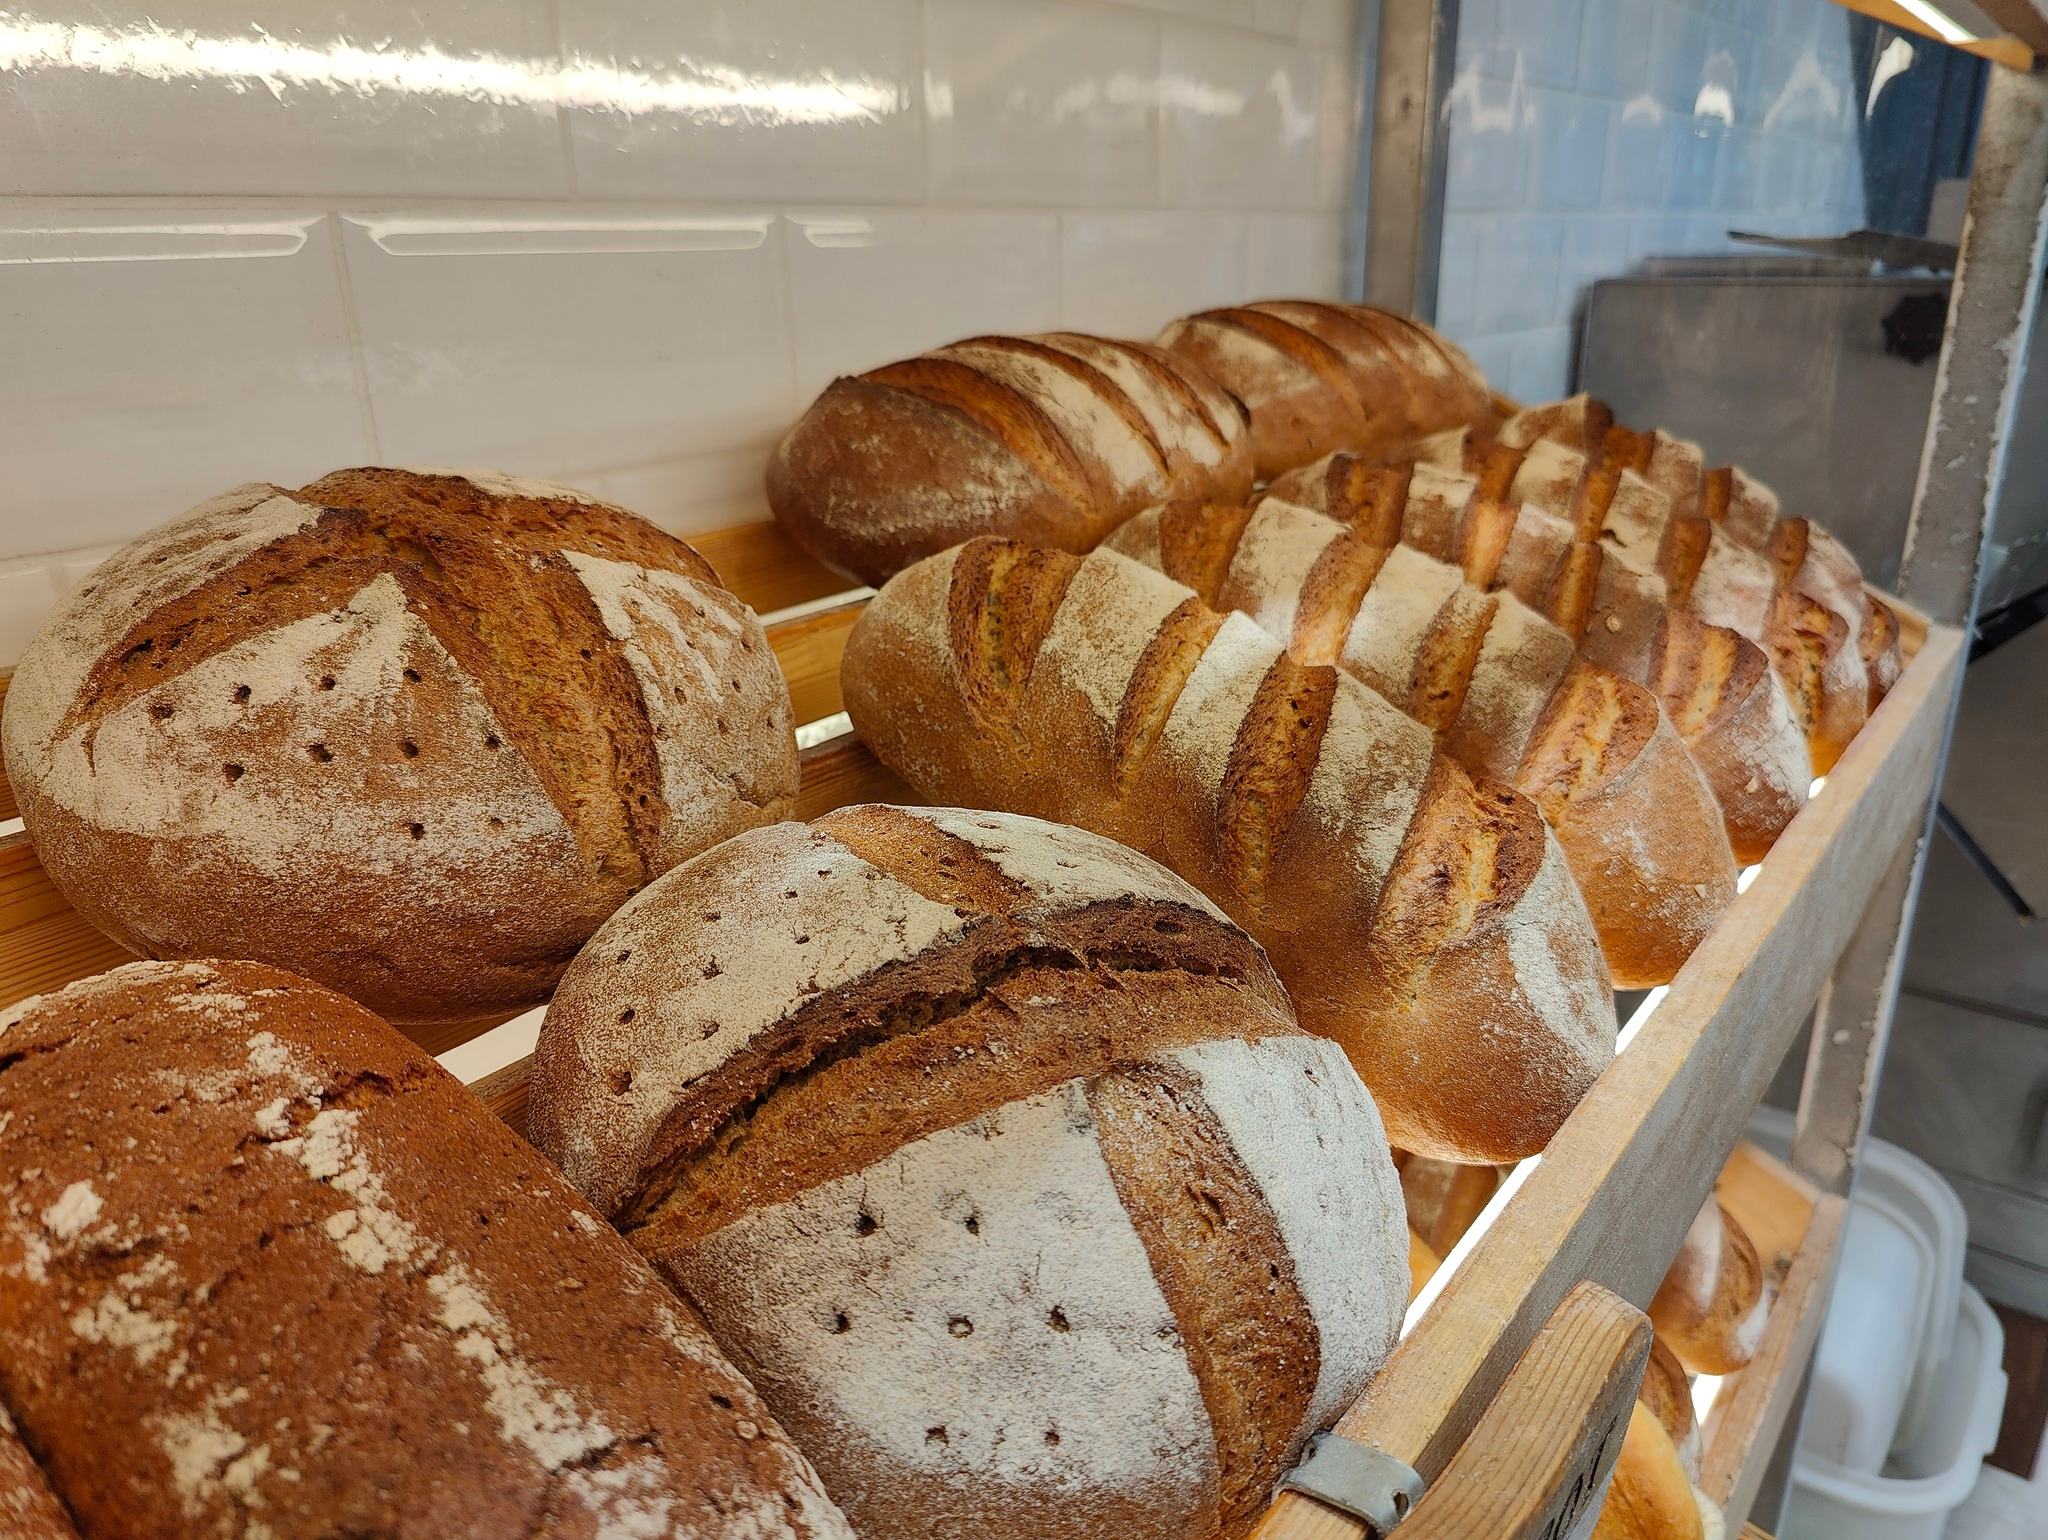 German bread and other specialties can be found in Saruul Market